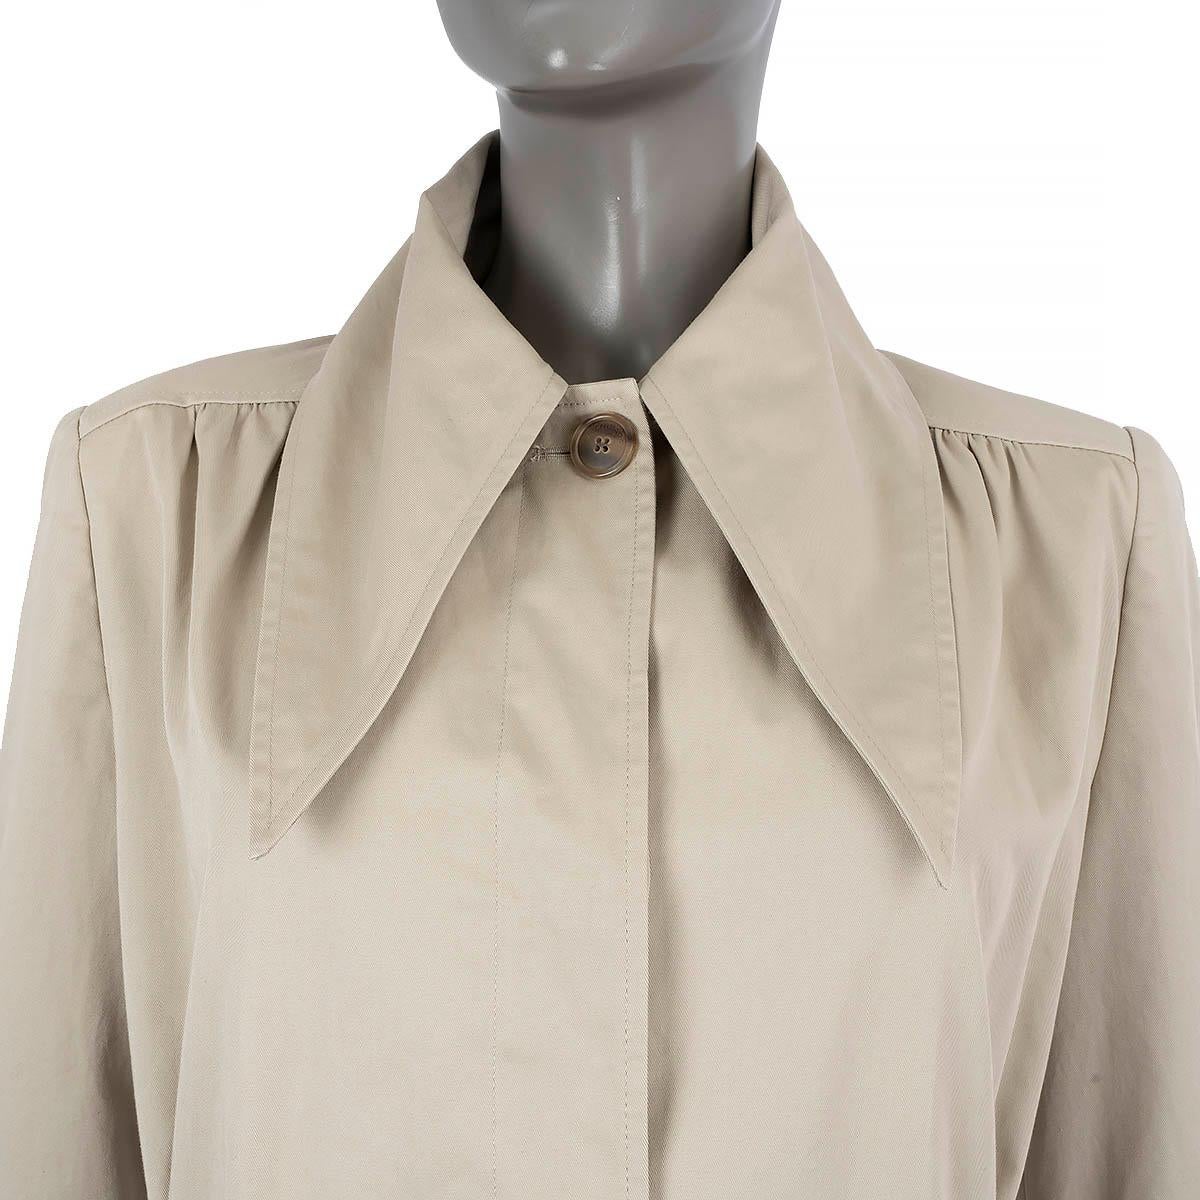 BALENCIAGA beige cotton 2017 SCARF TRENCH Coat Jacket 40 M For Sale 6